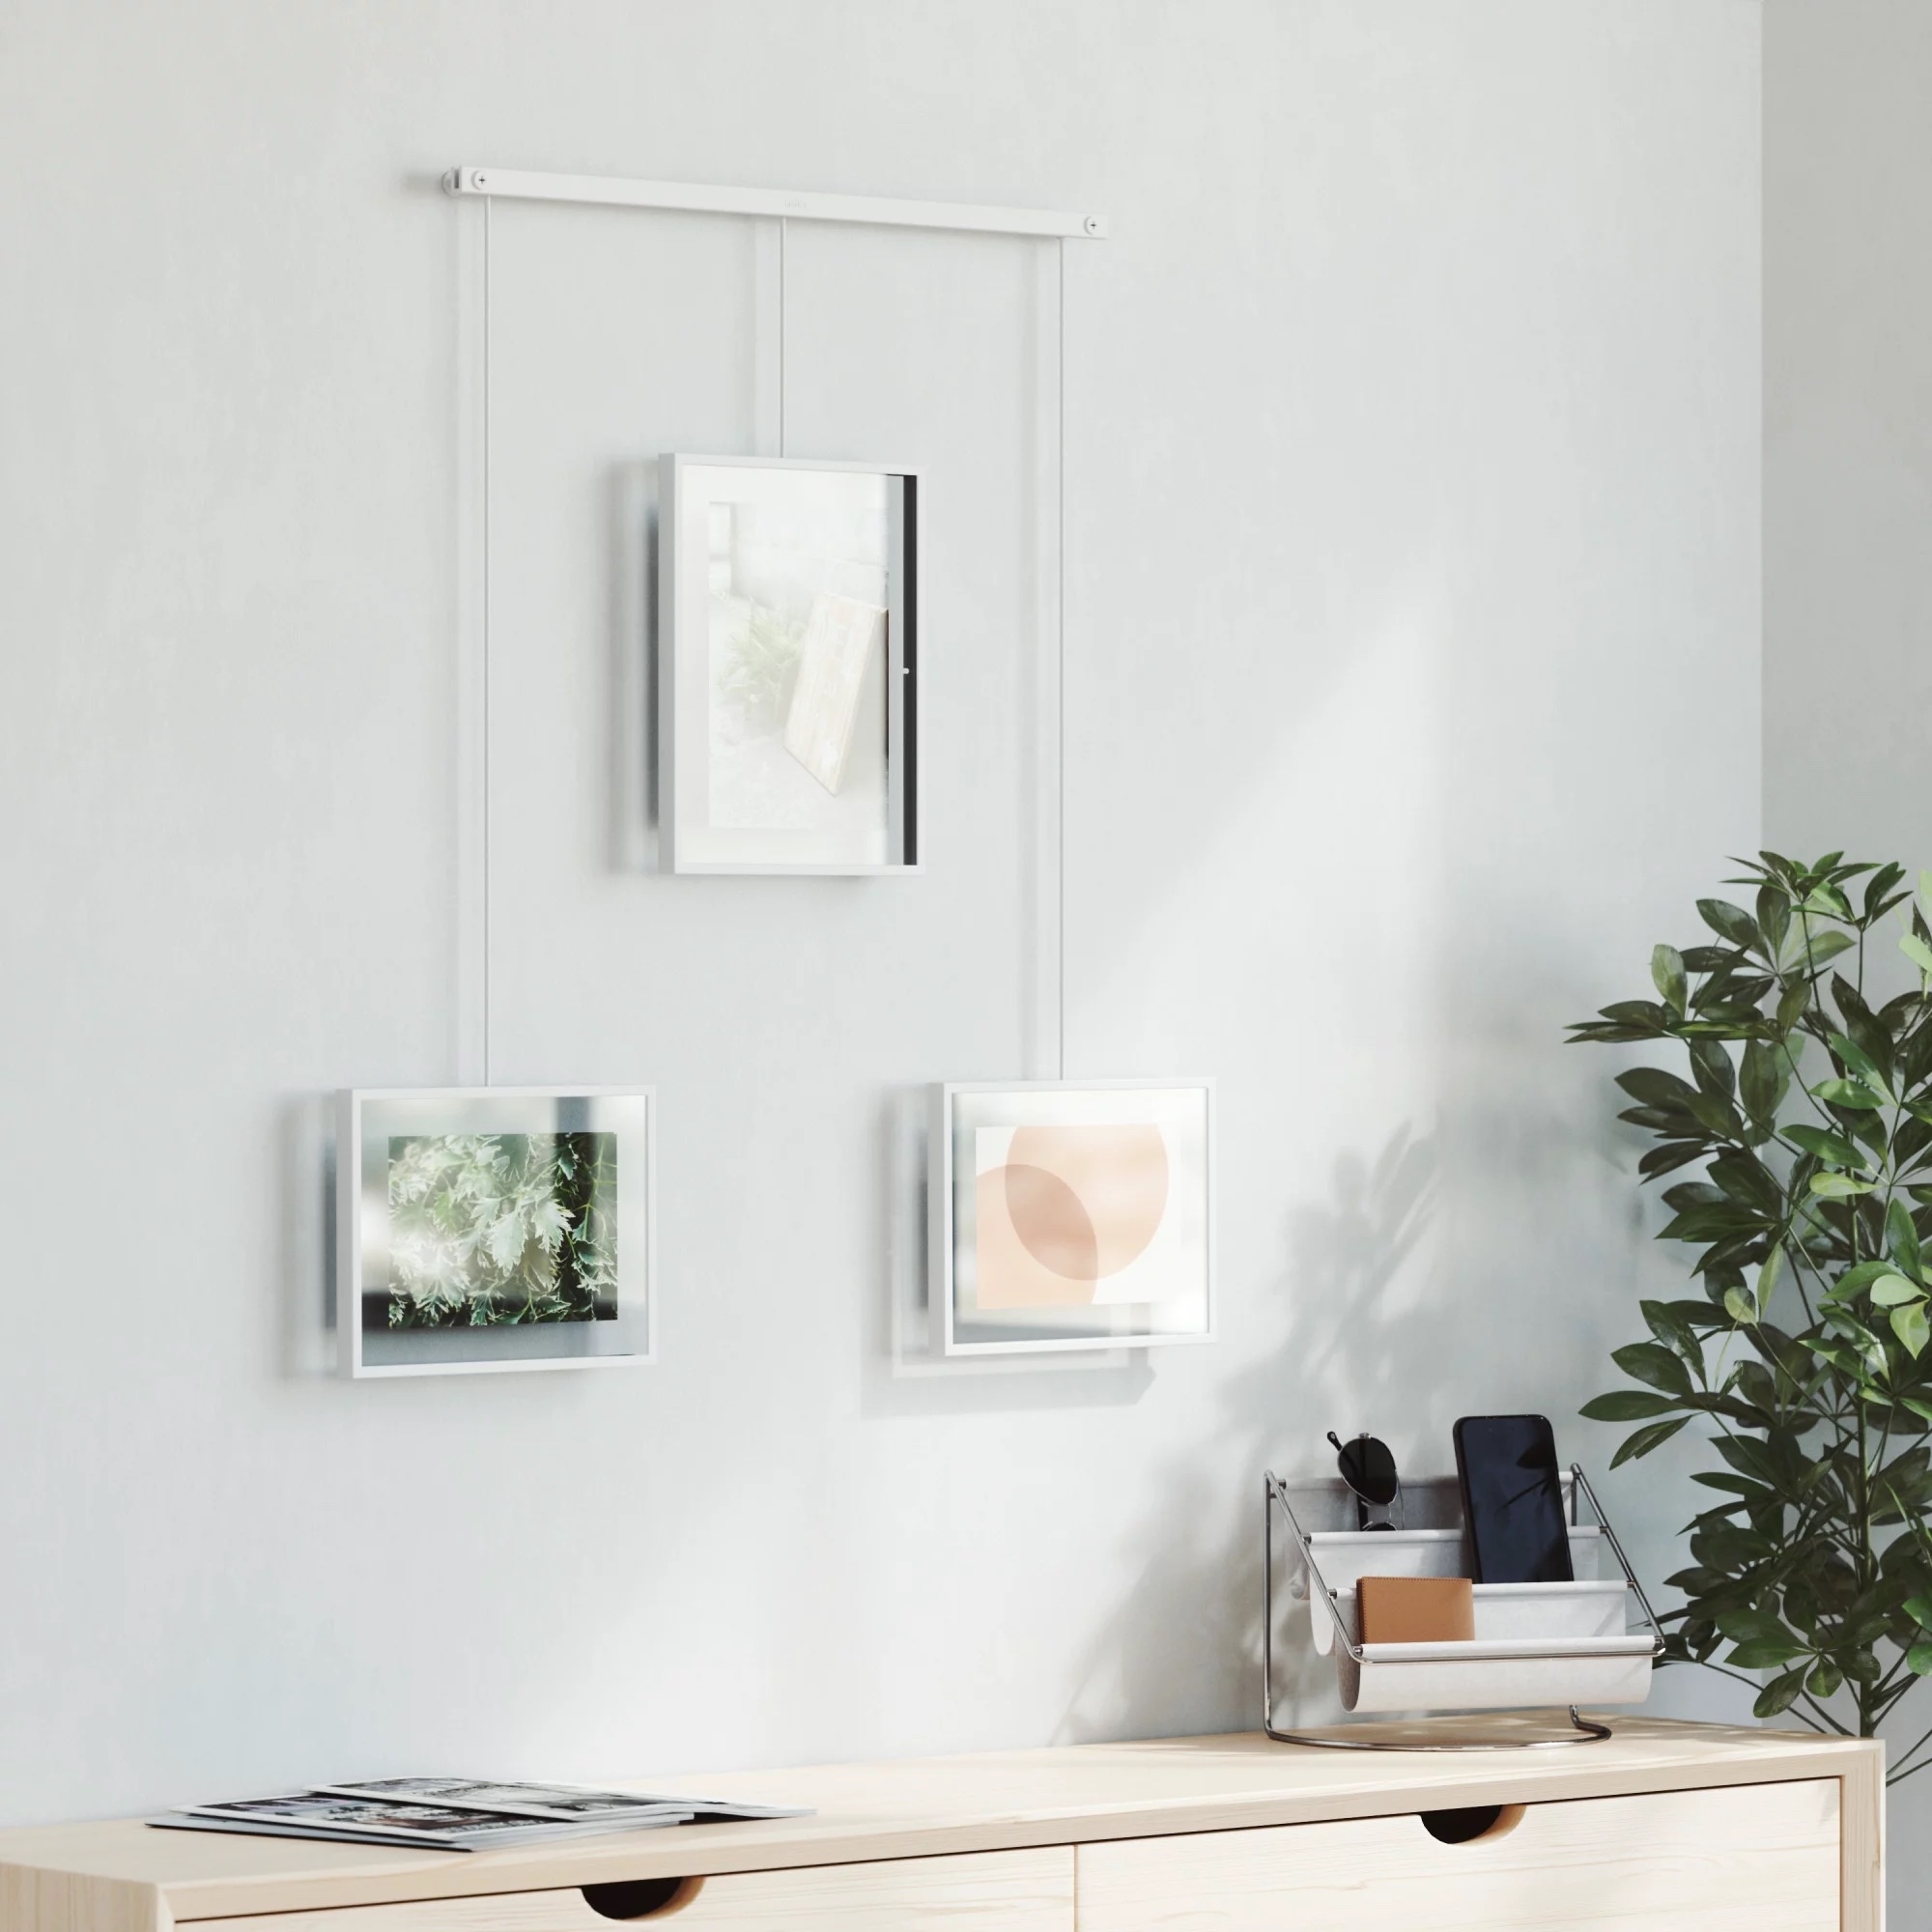 The gallery wall set with three frames in the color white